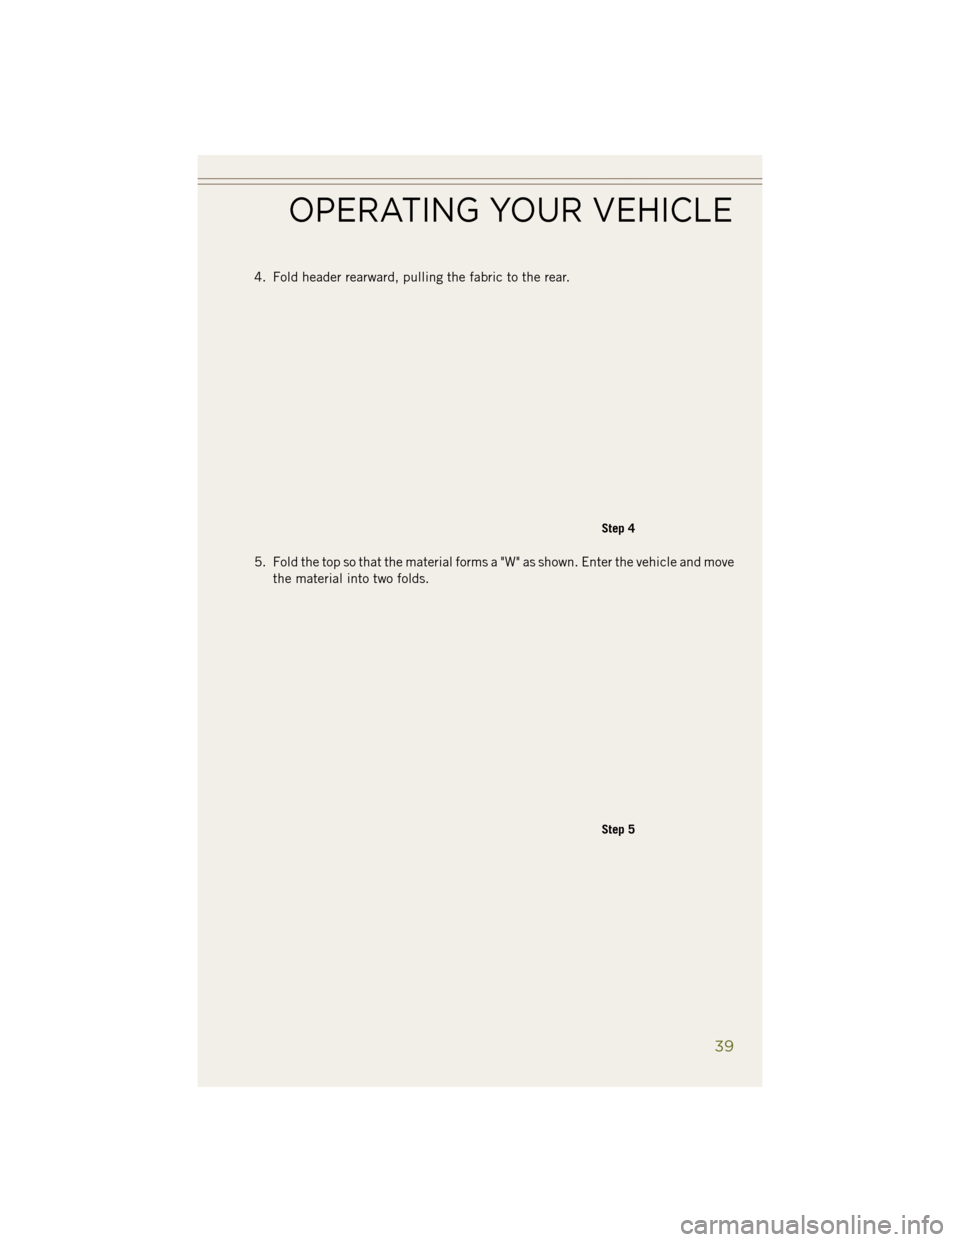 JEEP WRANGLER 2014 JK / 3.G Service Manual 4. Fold header rearward, pulling the fabric to the rear.
5. Fold the top so that the material forms a "W" as shown. Enter the vehicle and movethe material into two folds.
Step 4
Step 5
OPERATING YOUR 